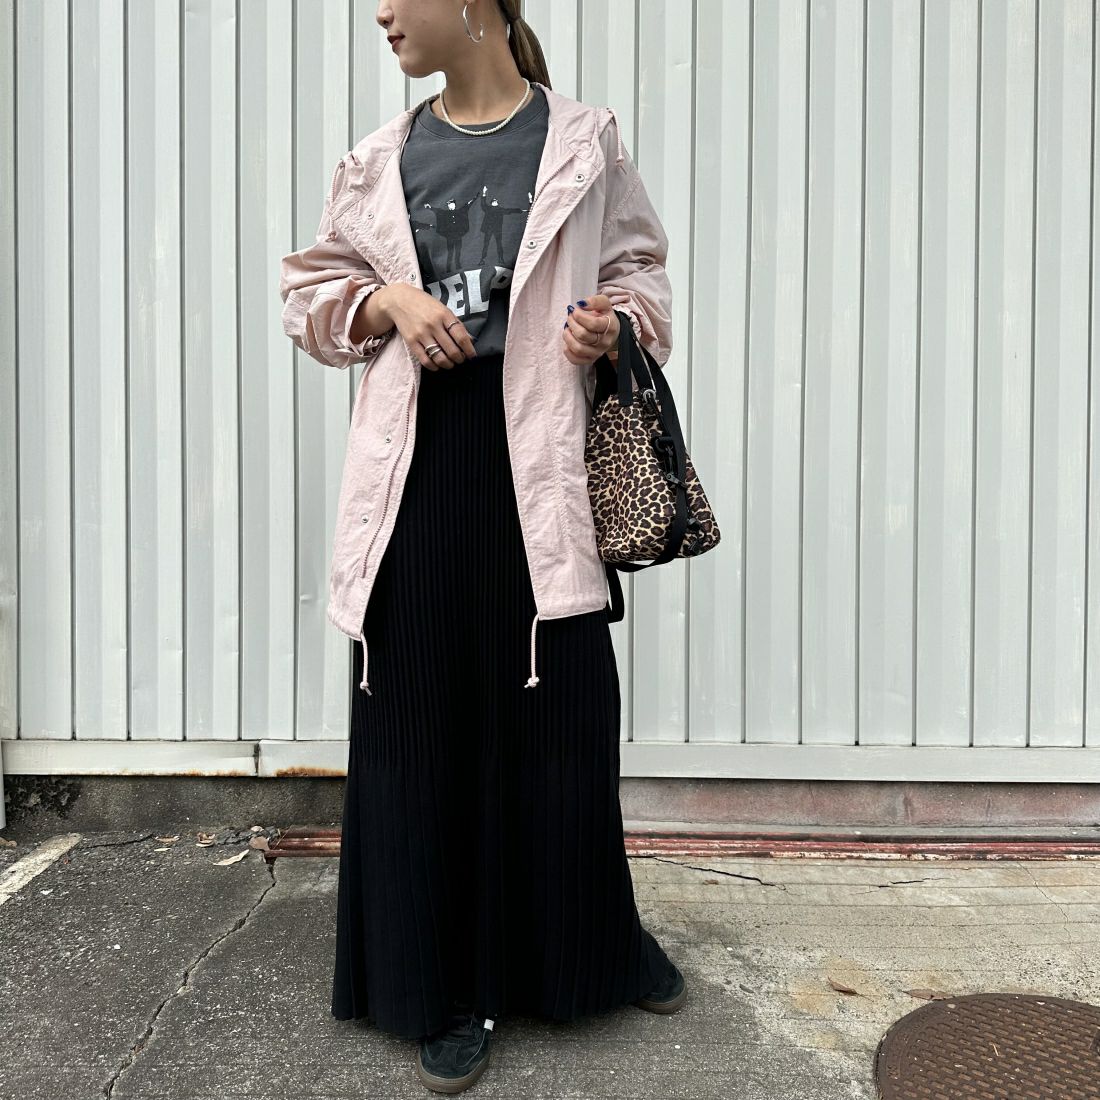 Jeans Factory Clothes [ジーンズファクトリークローズ] ショート丈 ナイロンモッズパーカー [IN1-CT-4] PINK &&モデル身長：156cm 着用サイズ：F&&